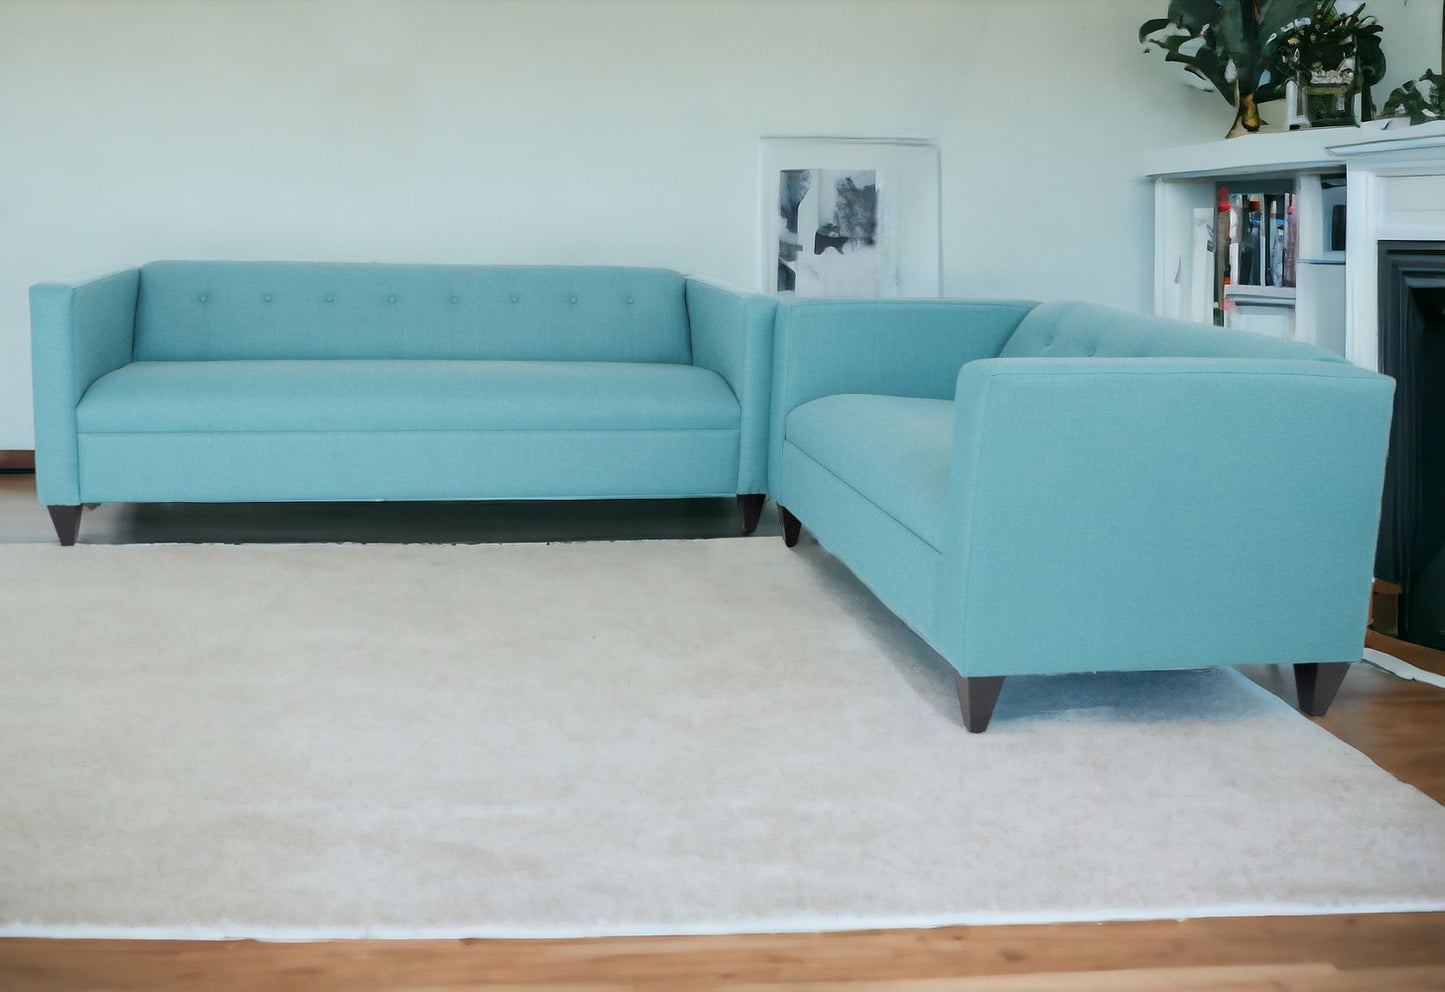 80" Teal Blue Polyester Sofa With Dark Brown Legs